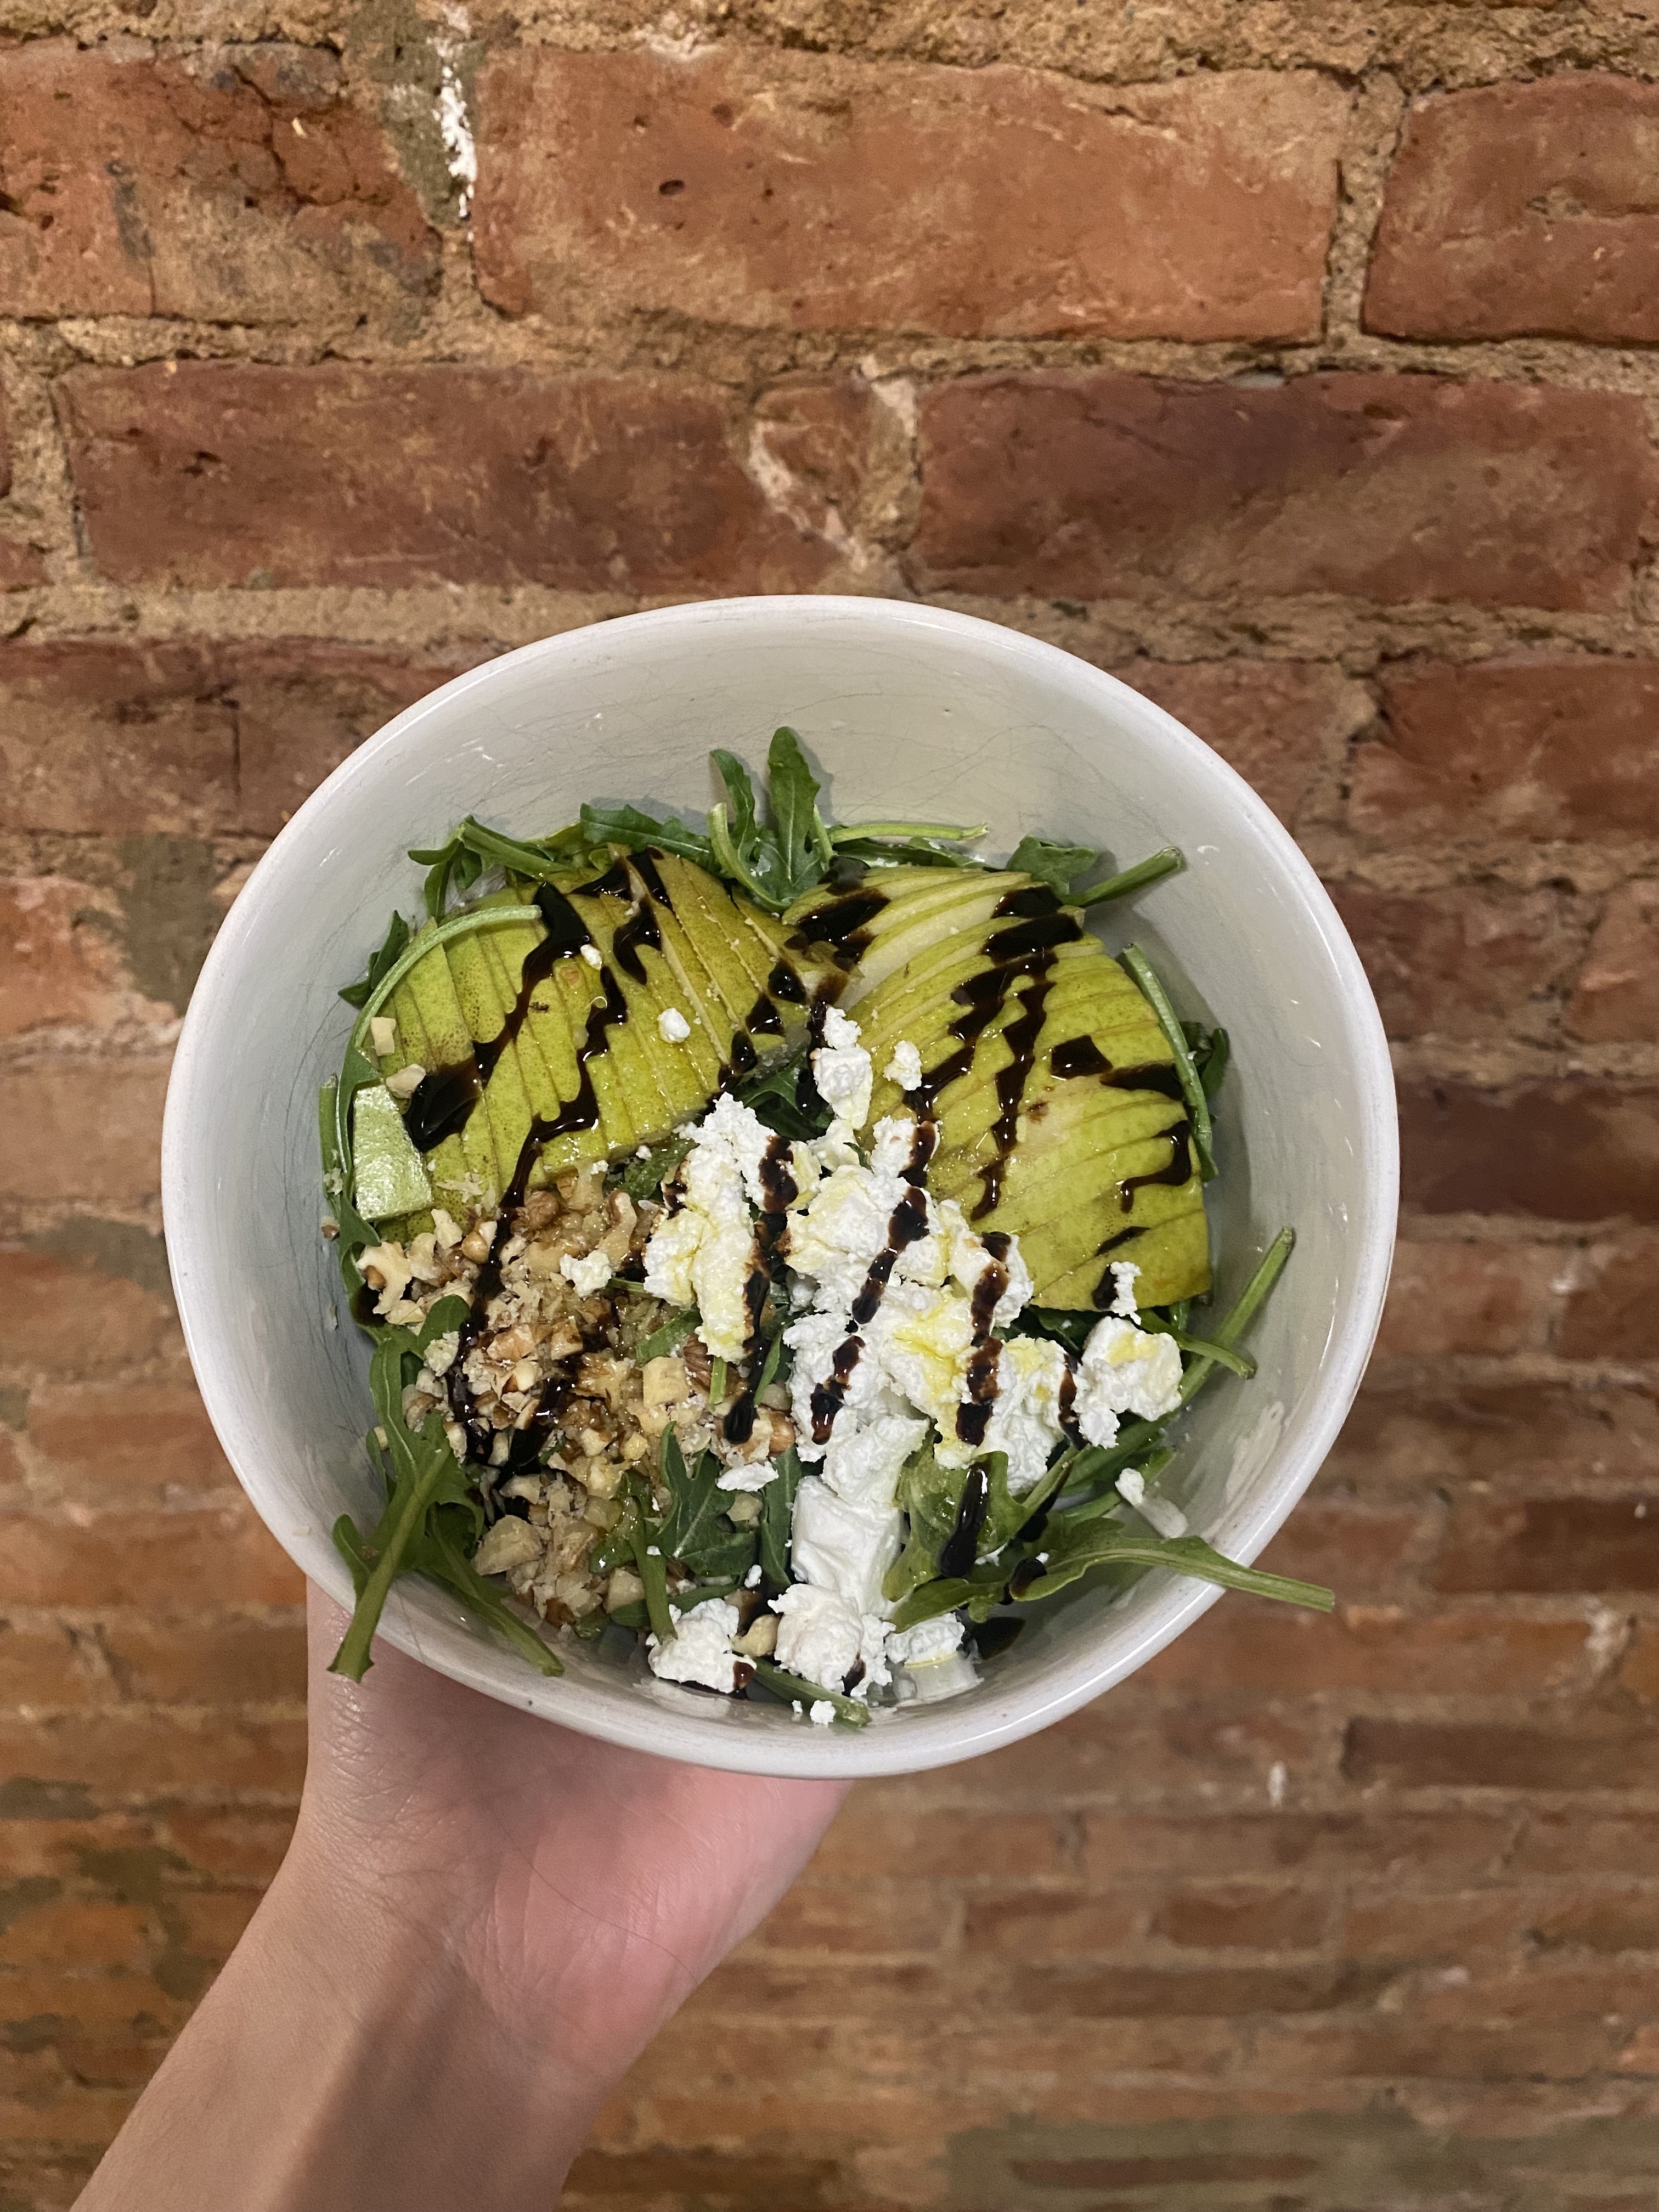 Person holding a bowl with salad, topped with avocado, cheese, and a dark dressing drizzle. Brick wall in background